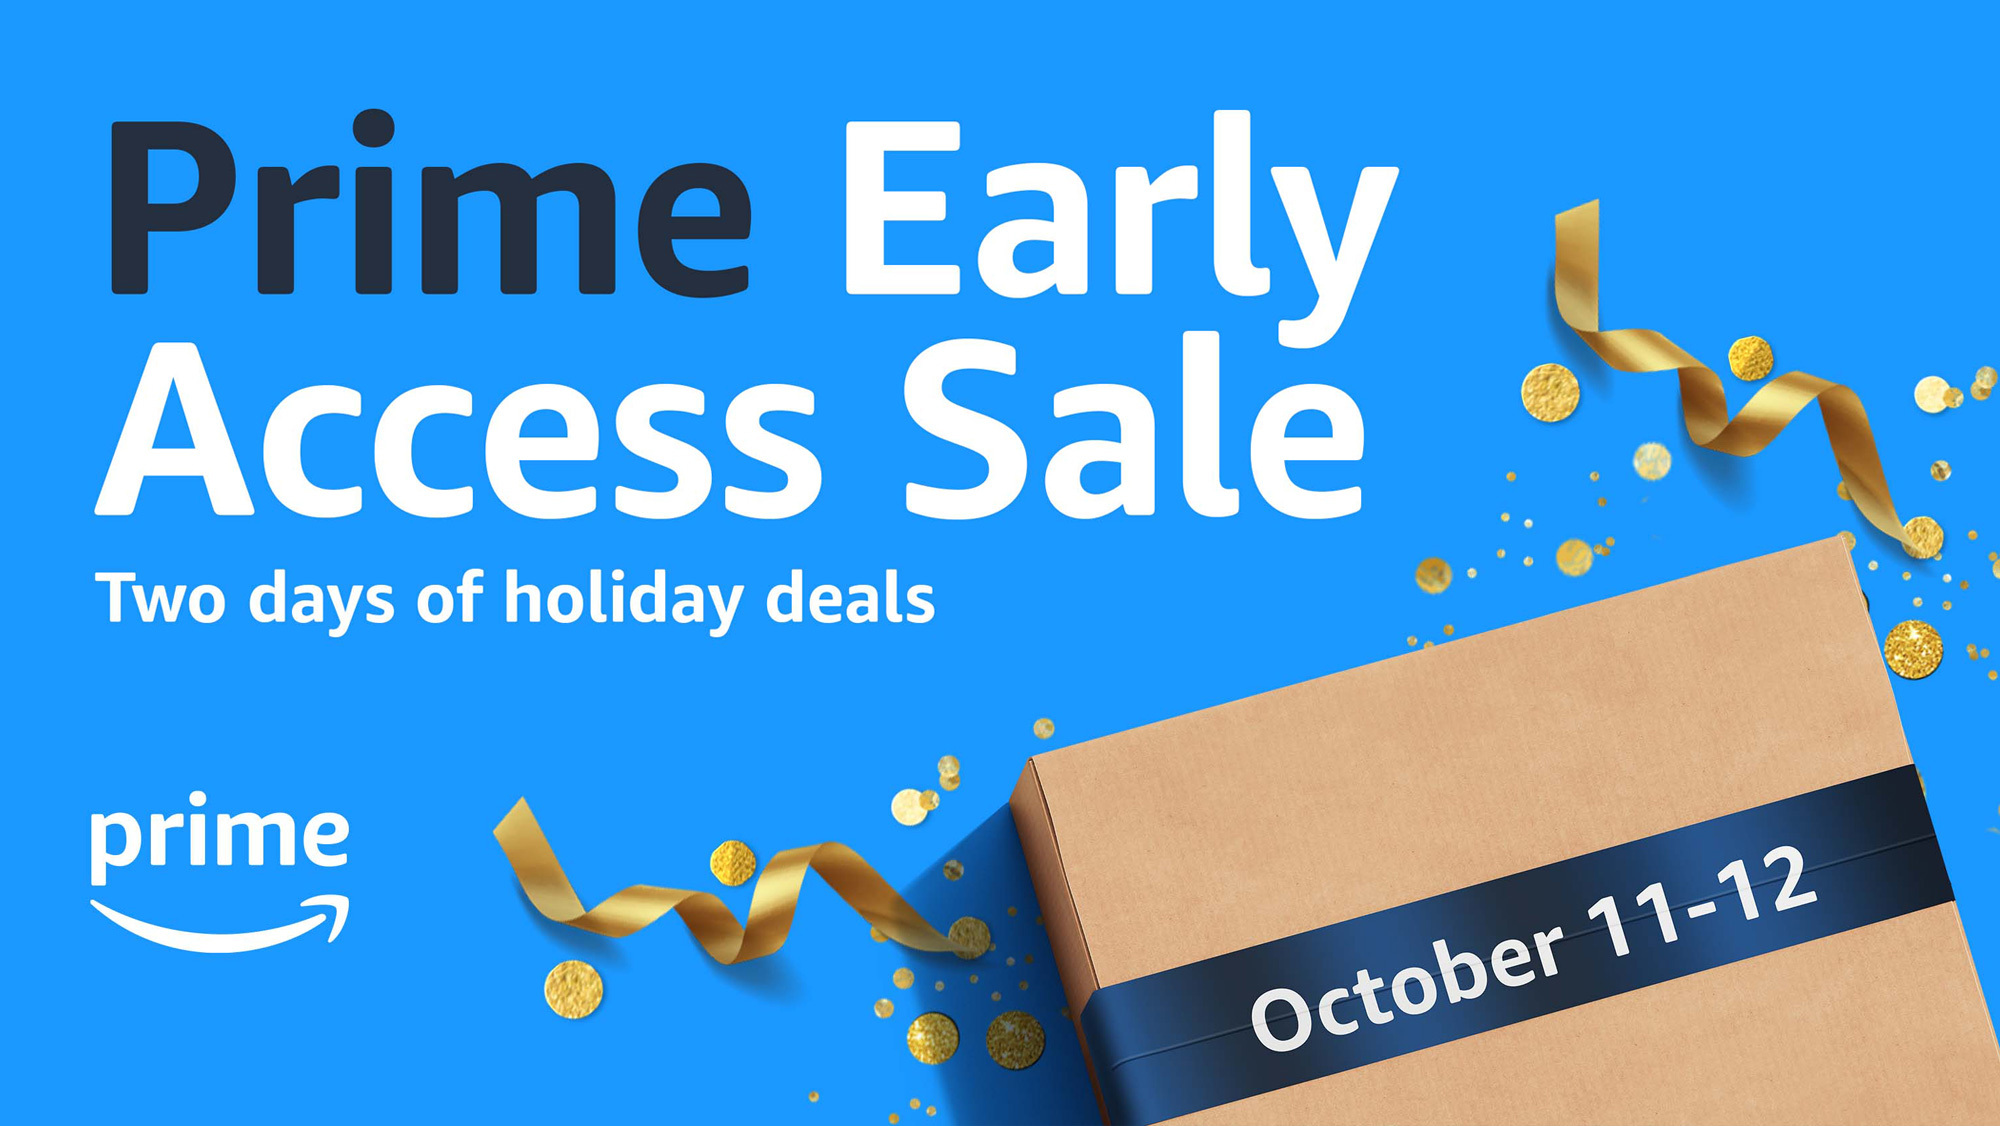 Amazon Prime Early Access Sale on Oct. 11-12